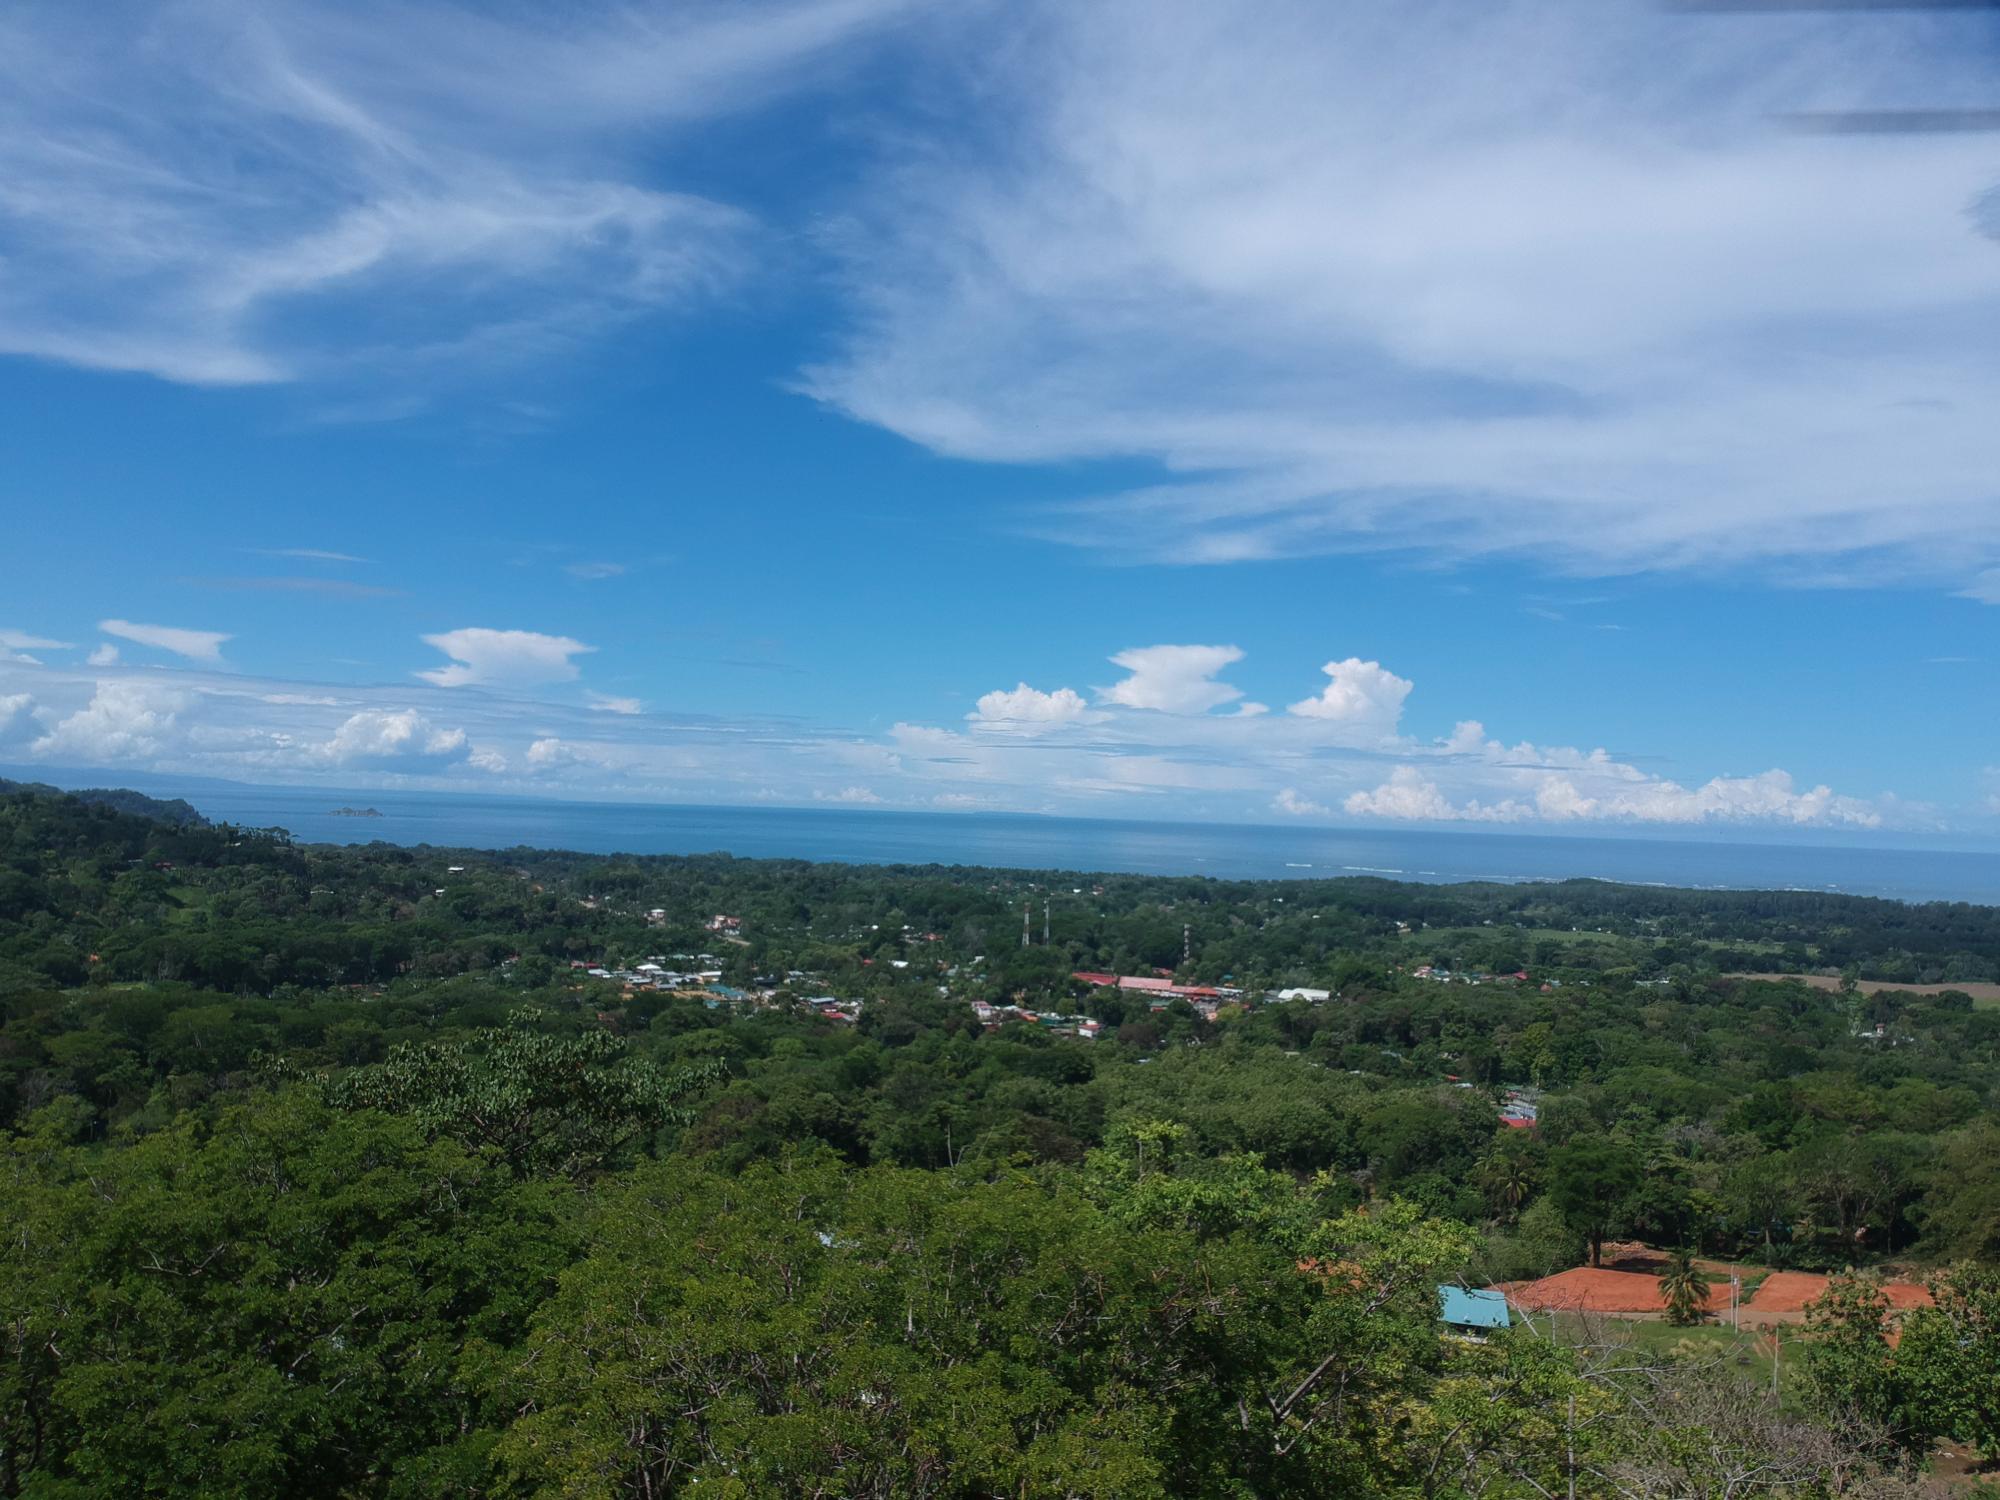 Picture of Residential Lots For Sale in Dominical, Puntarenas, Costa Rica